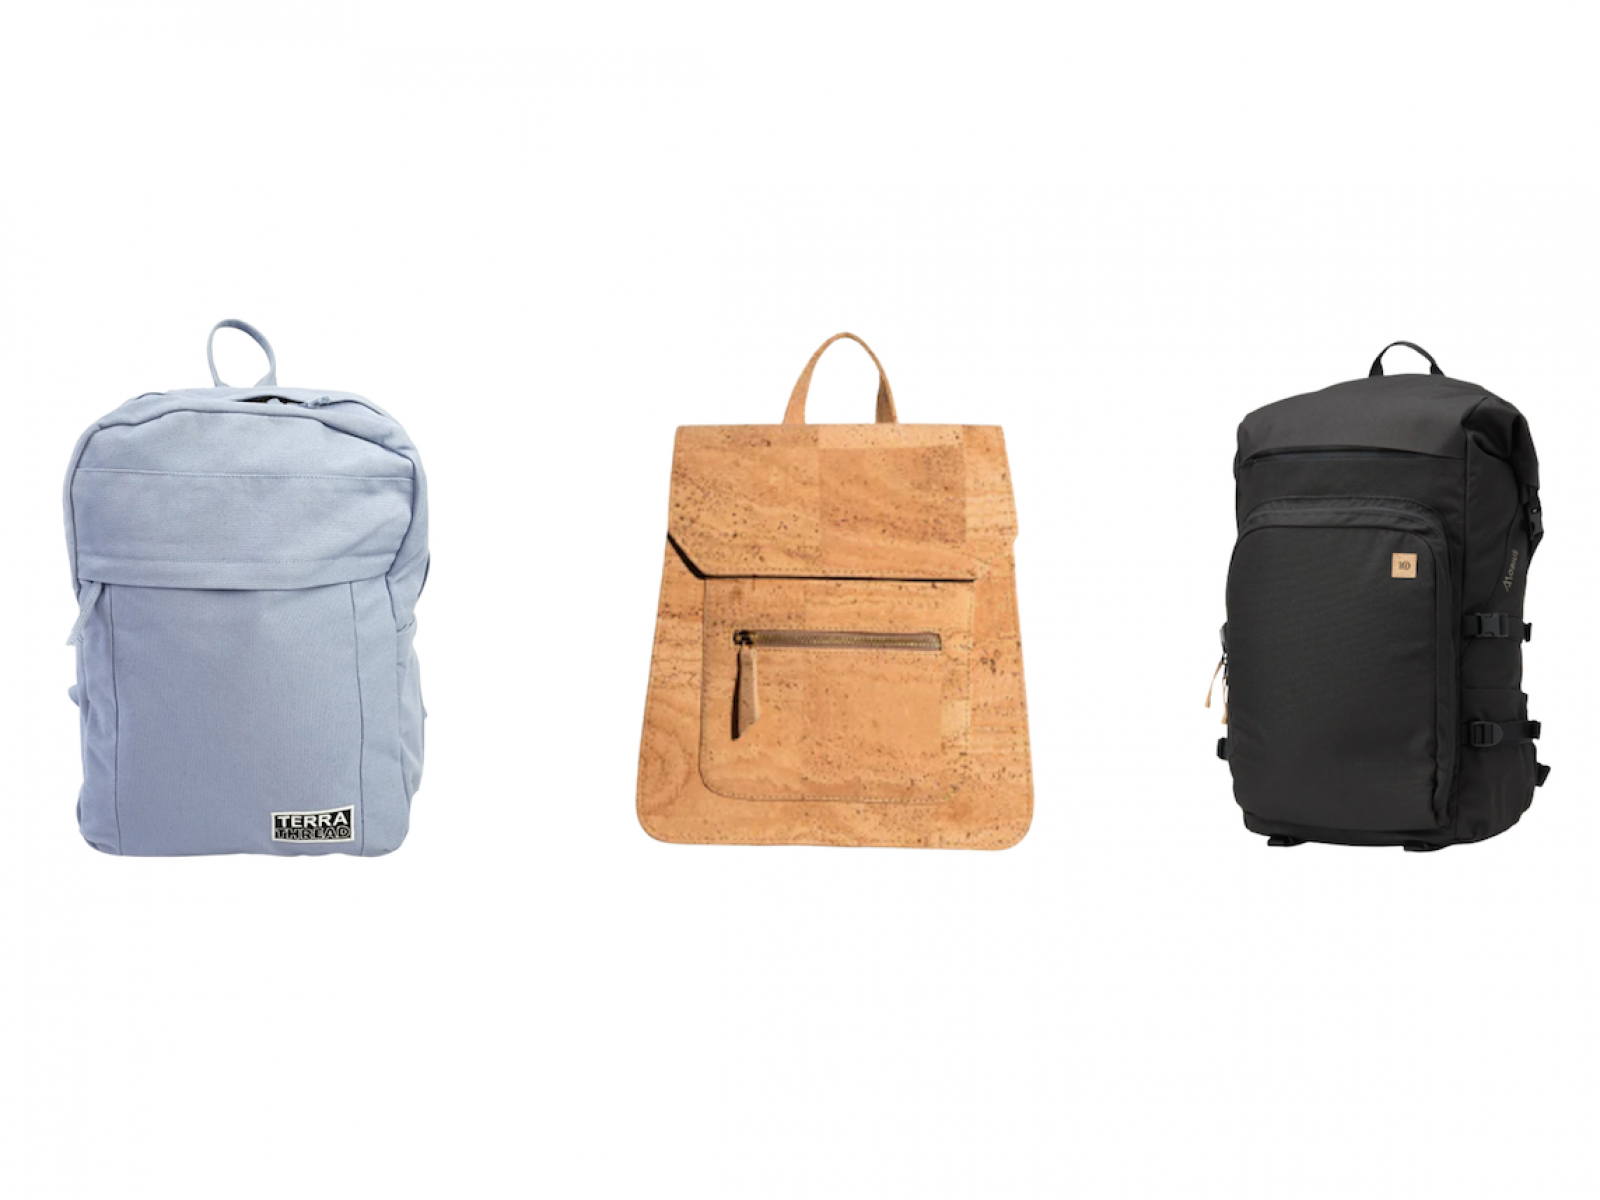 Encommium Verbonden Zeehaven Which Brand Makes the Best Sustainable Backpack for Back to School?